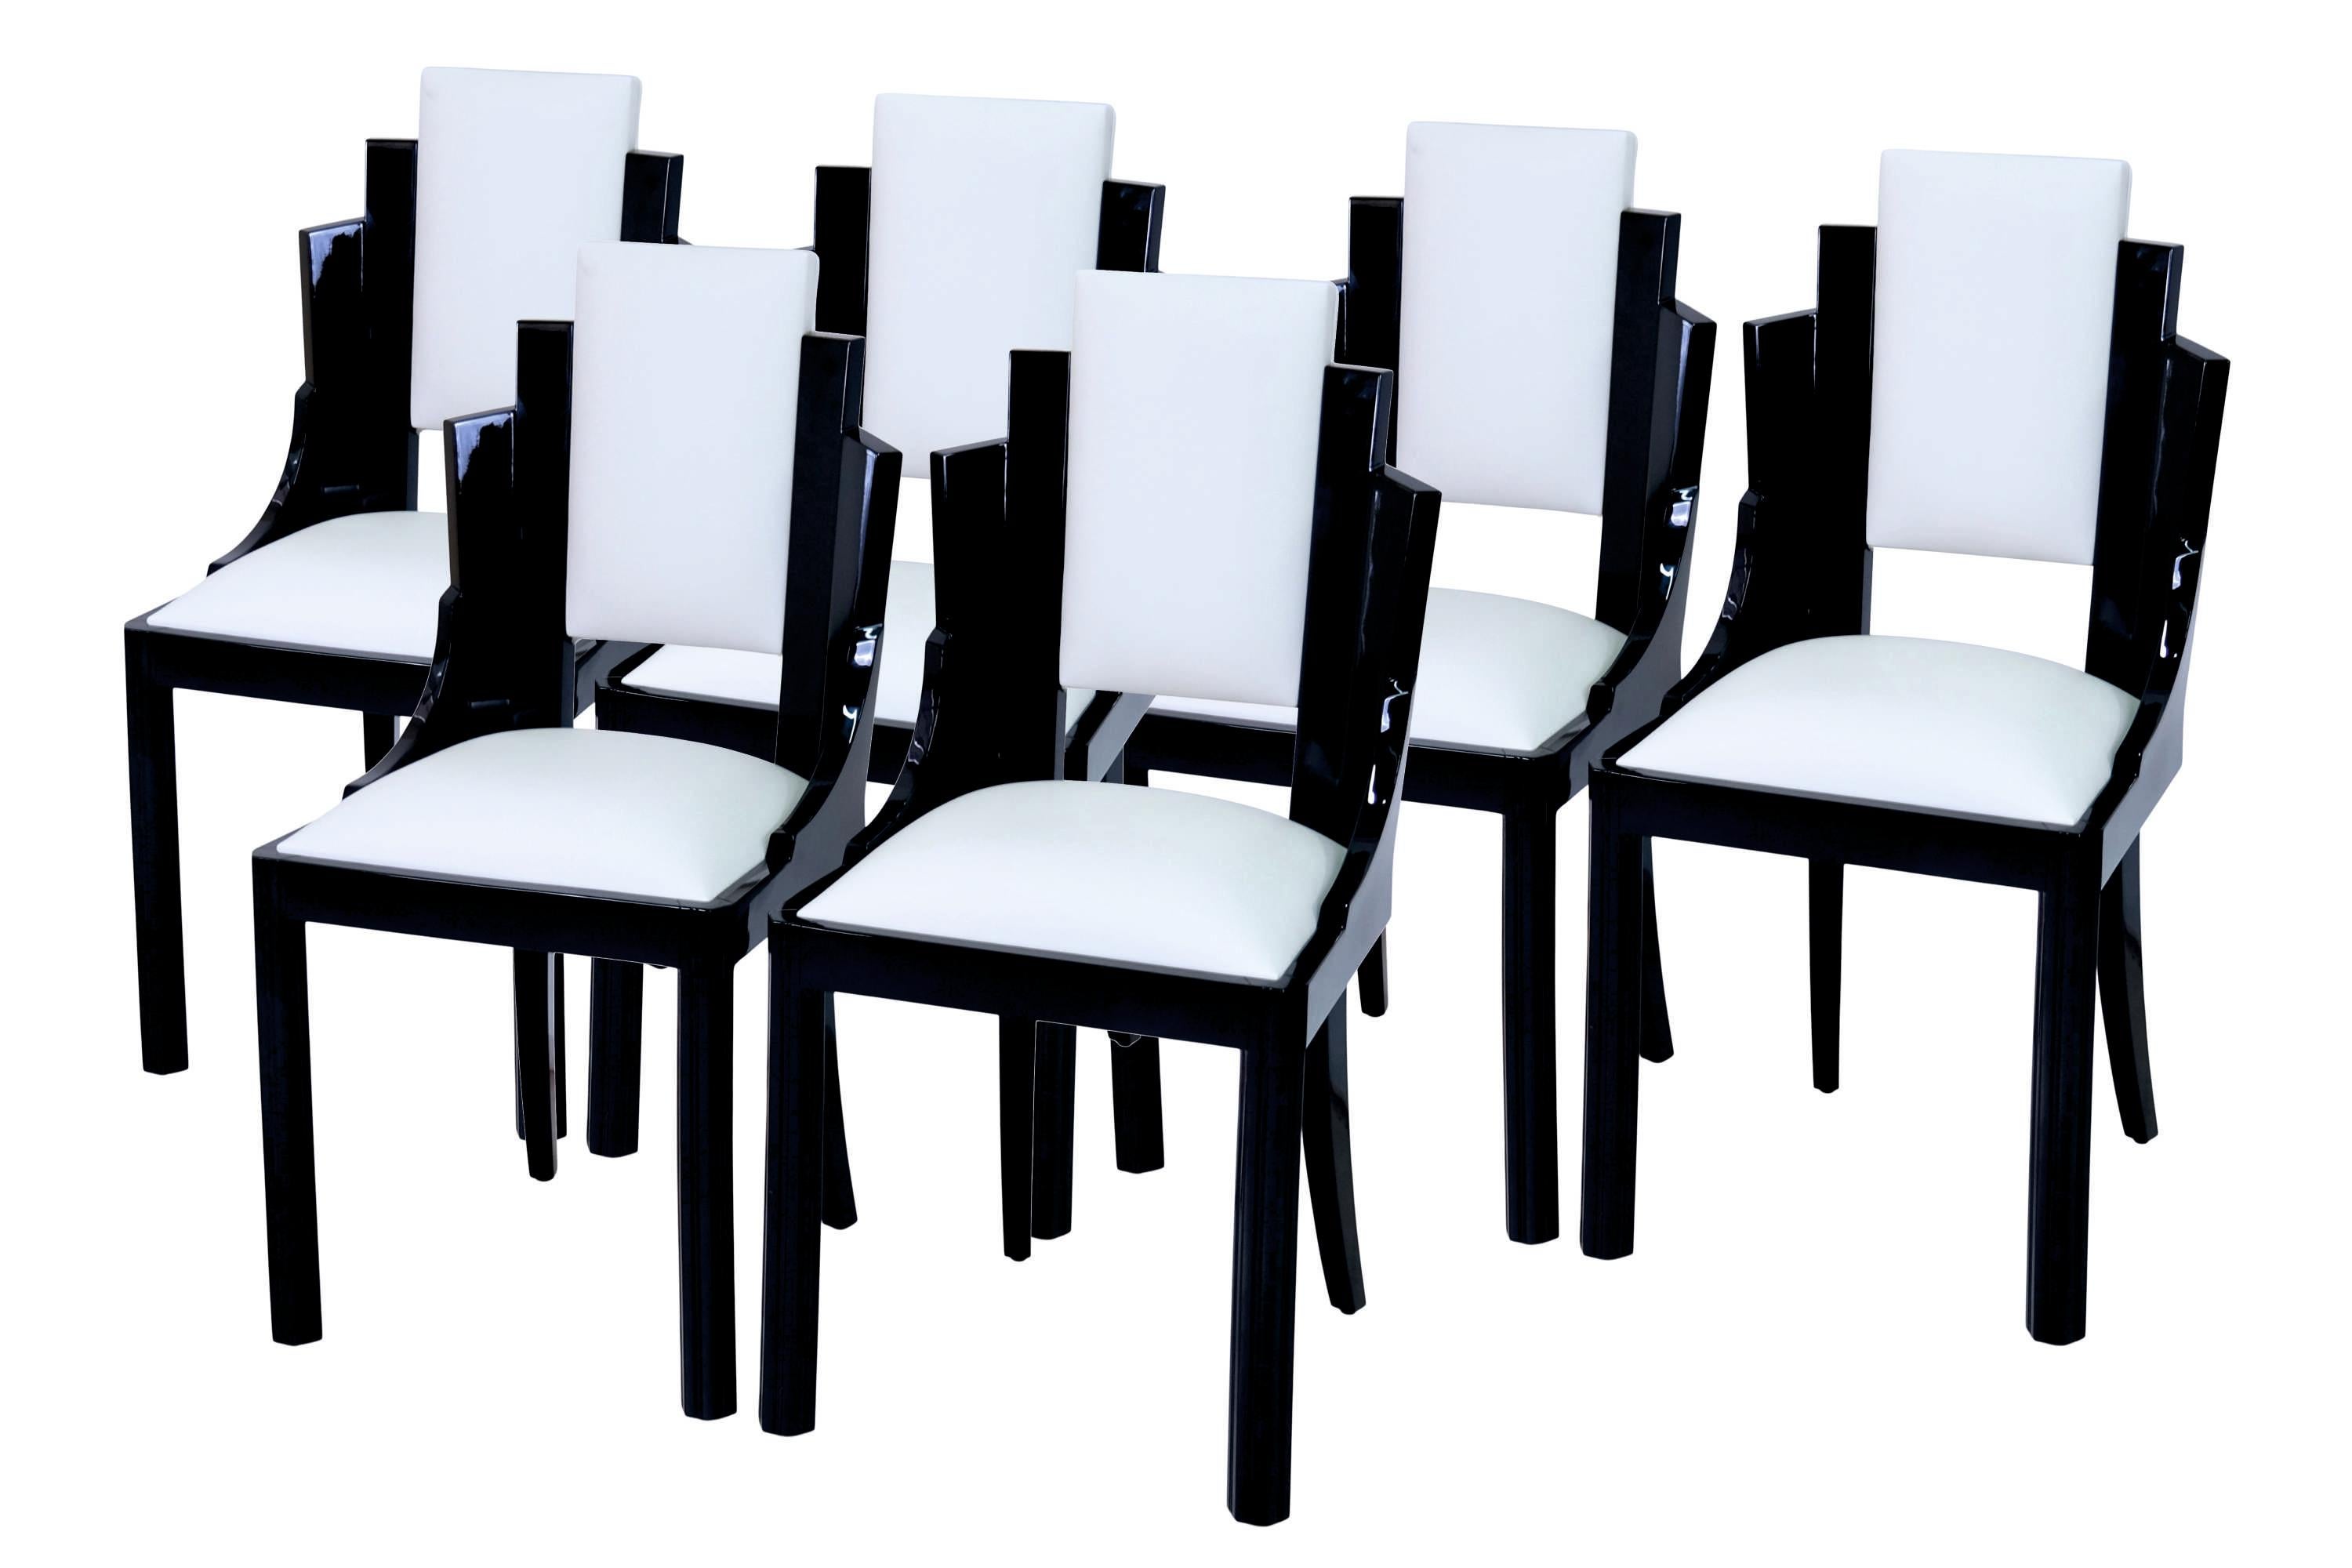 Set of Six 1930s Art Deco Dining Room Chairs in Black Lacquer and White Leather 1